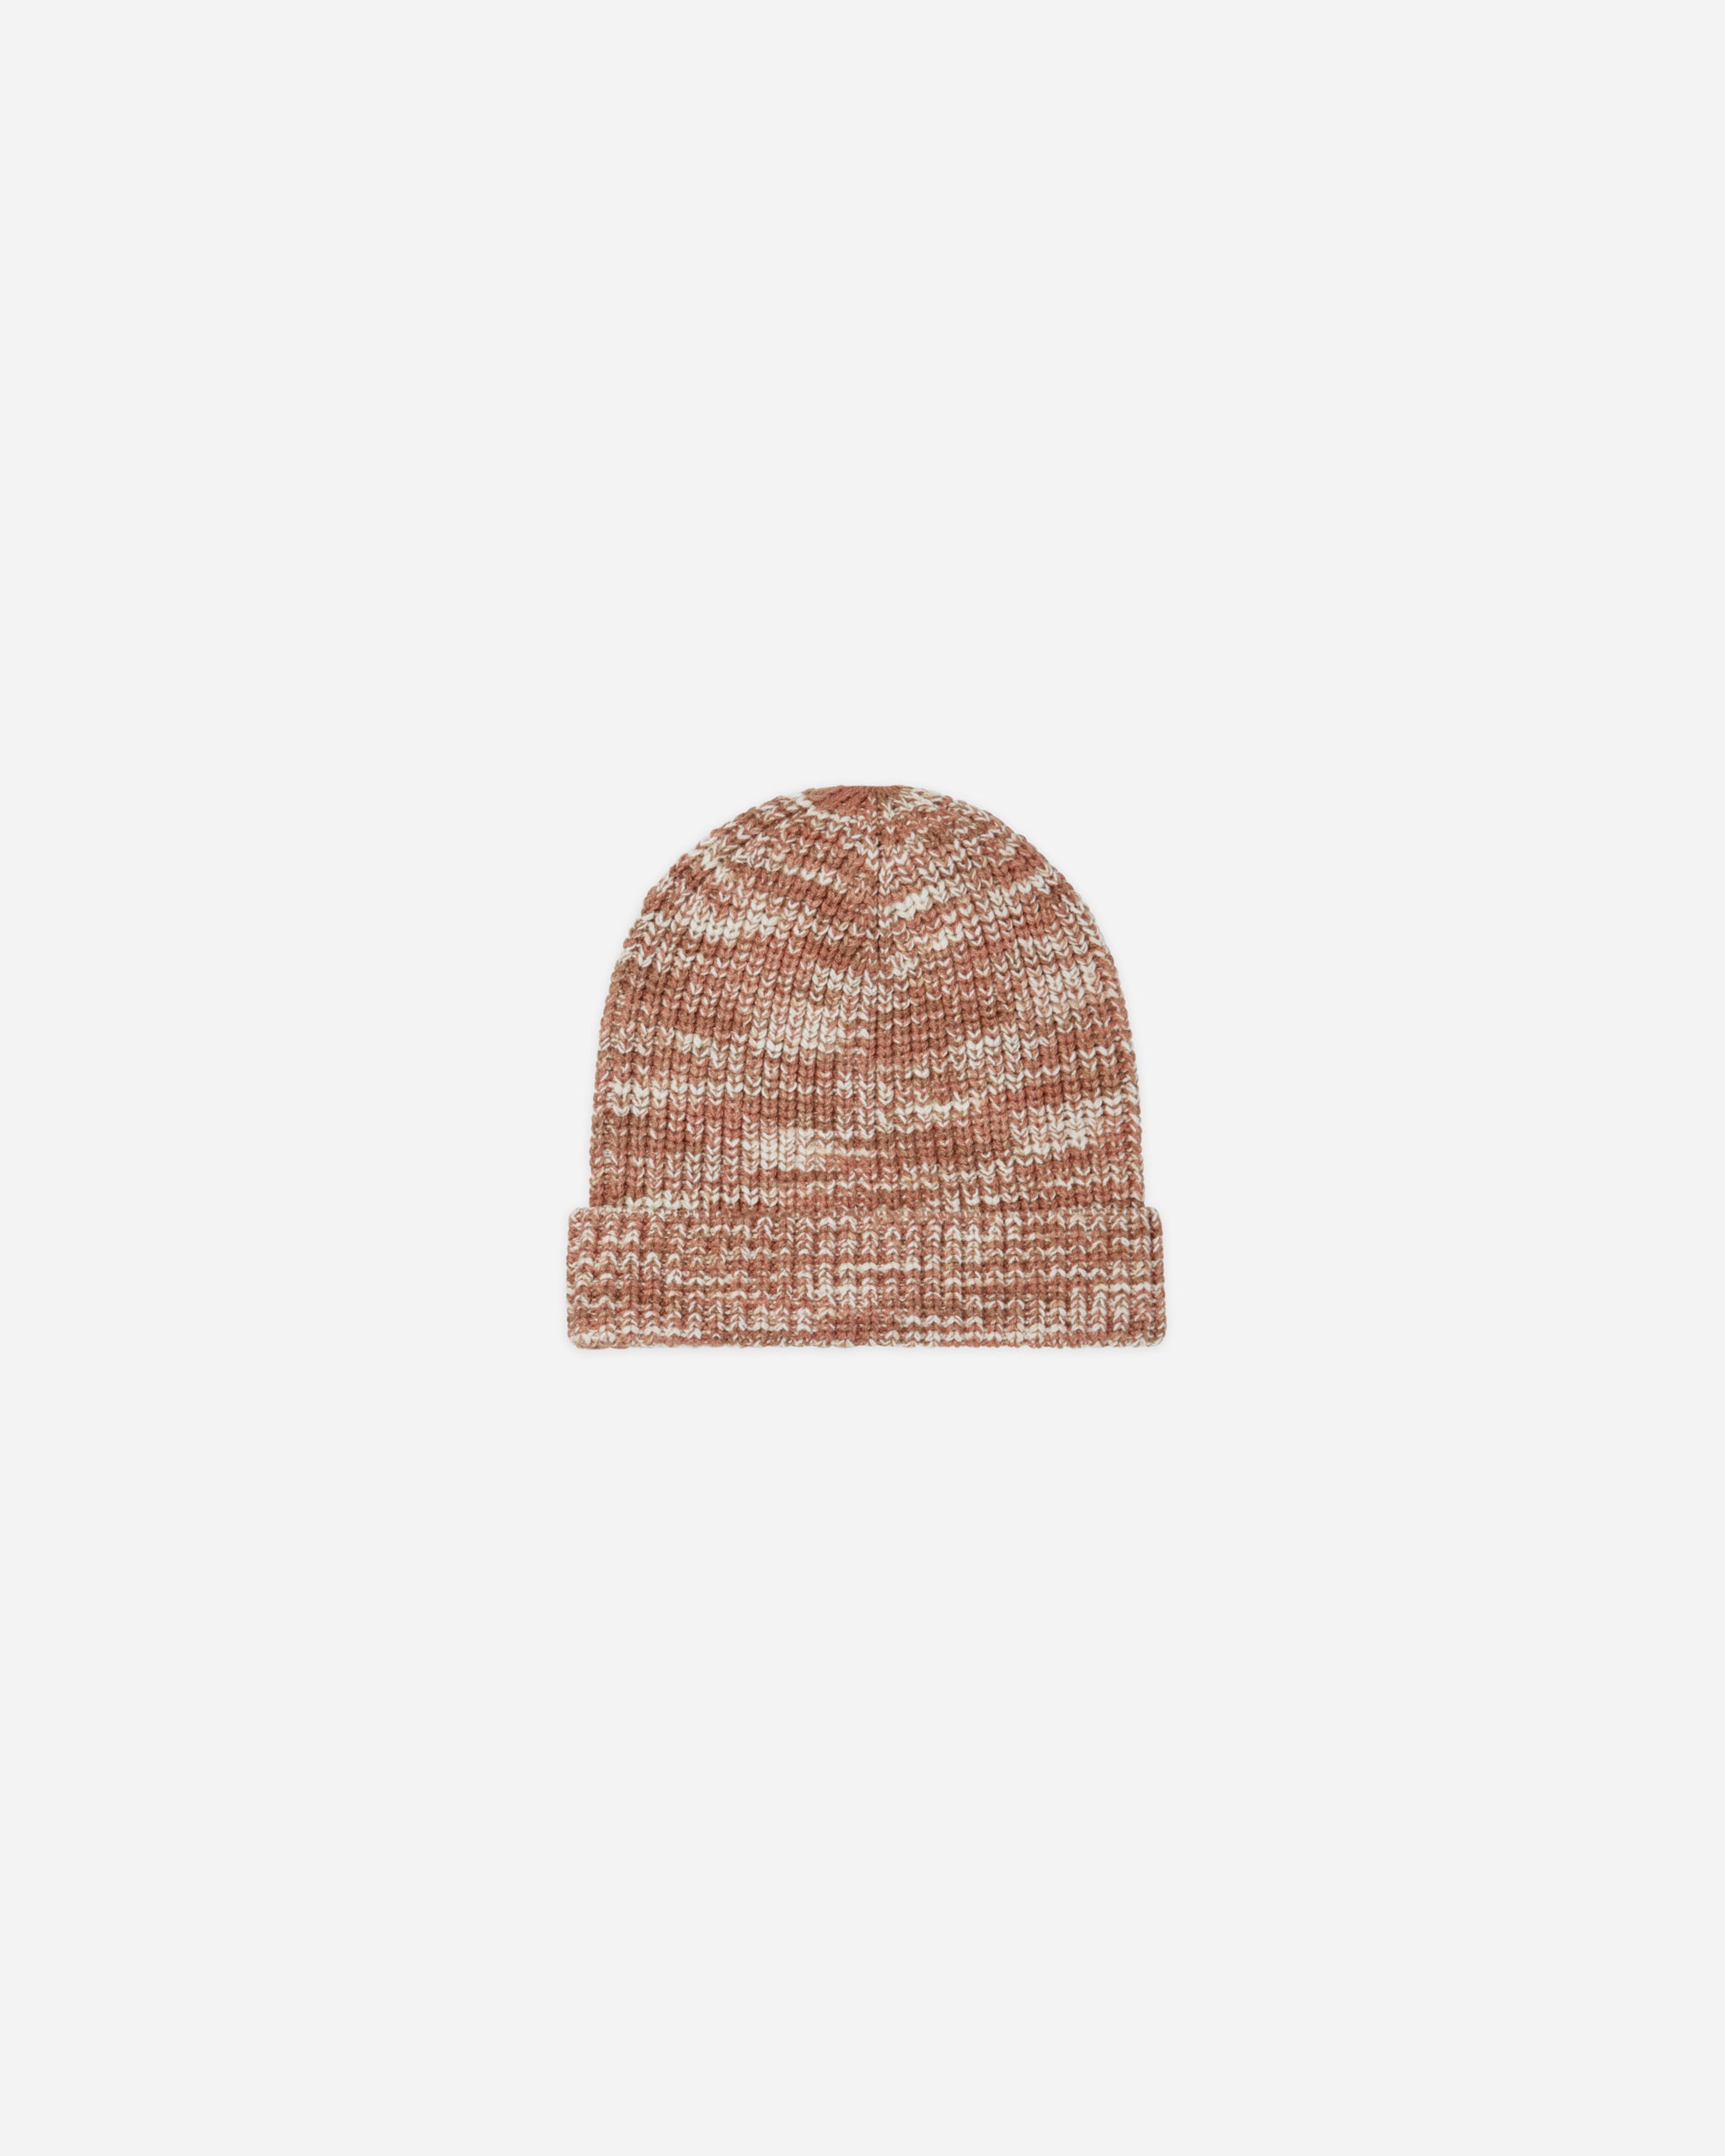 Beanie || Spice Heather - Rylee + Cru | Kids Clothes | Trendy Baby Clothes | Modern Infant Outfits |